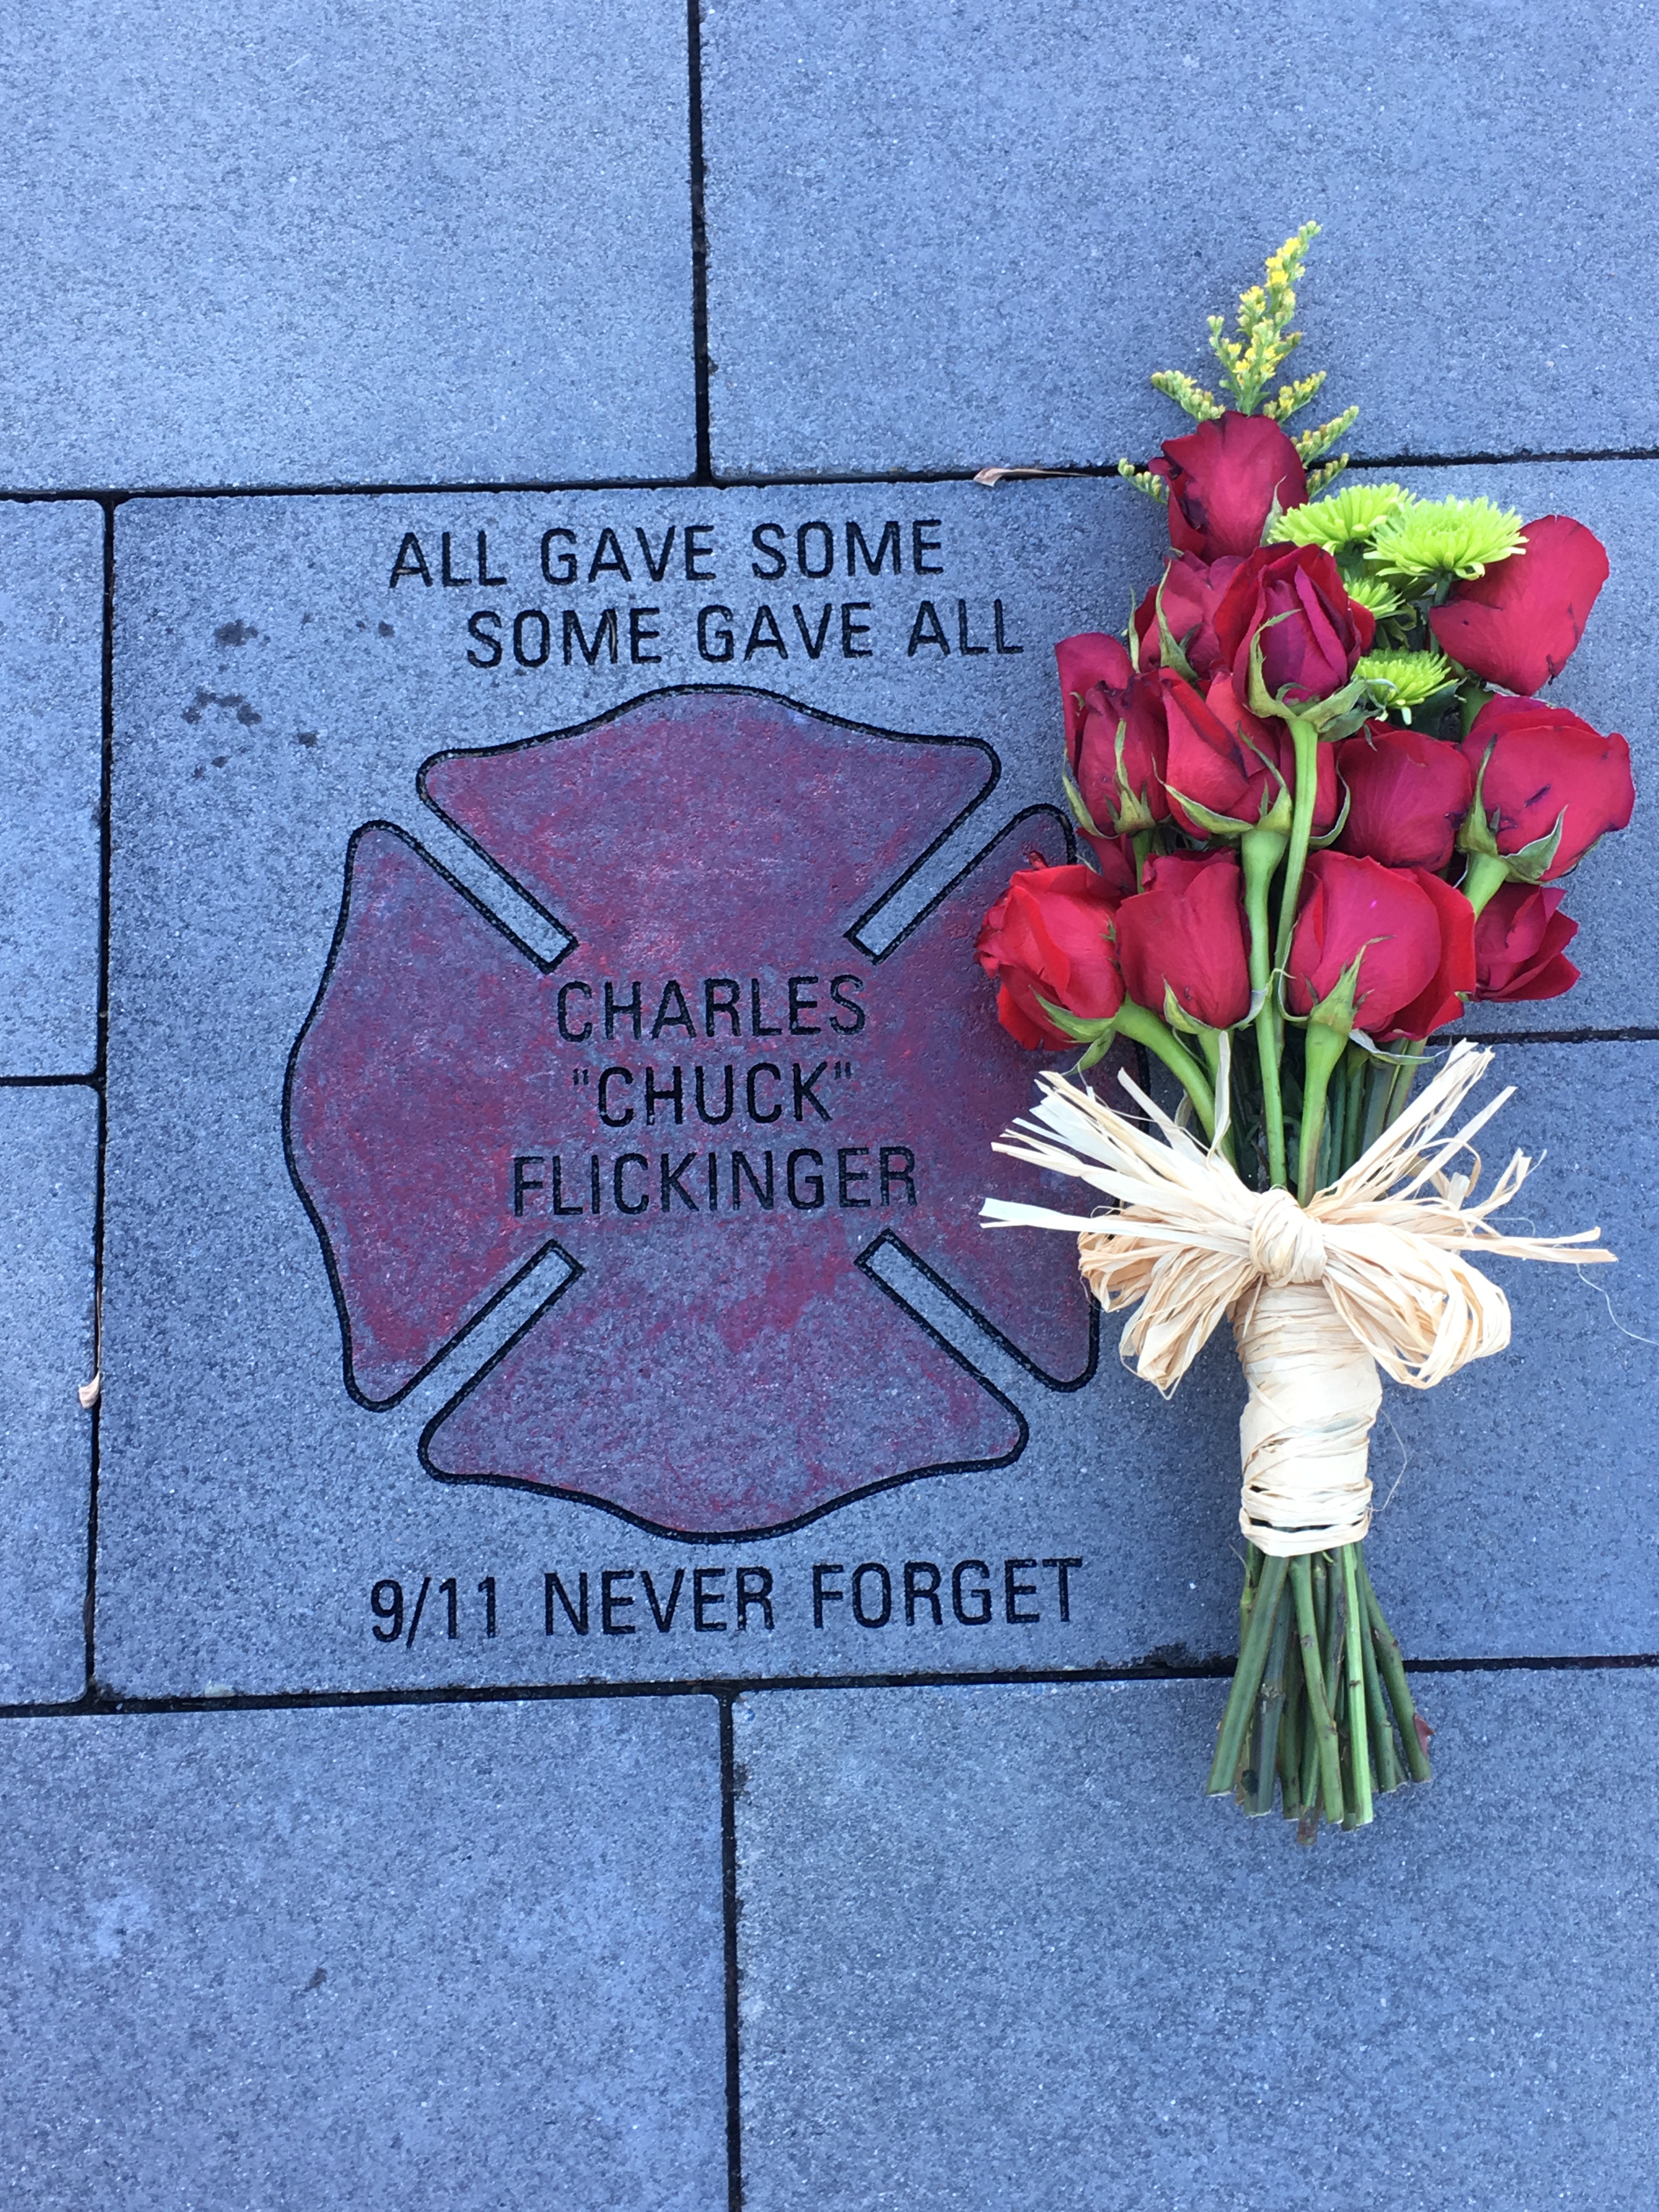 A memorial to Charles "Chuck" Flickinger, who volunteered as a firefighter on 9/11 (Photo courtesy of Charlotte Berwind)